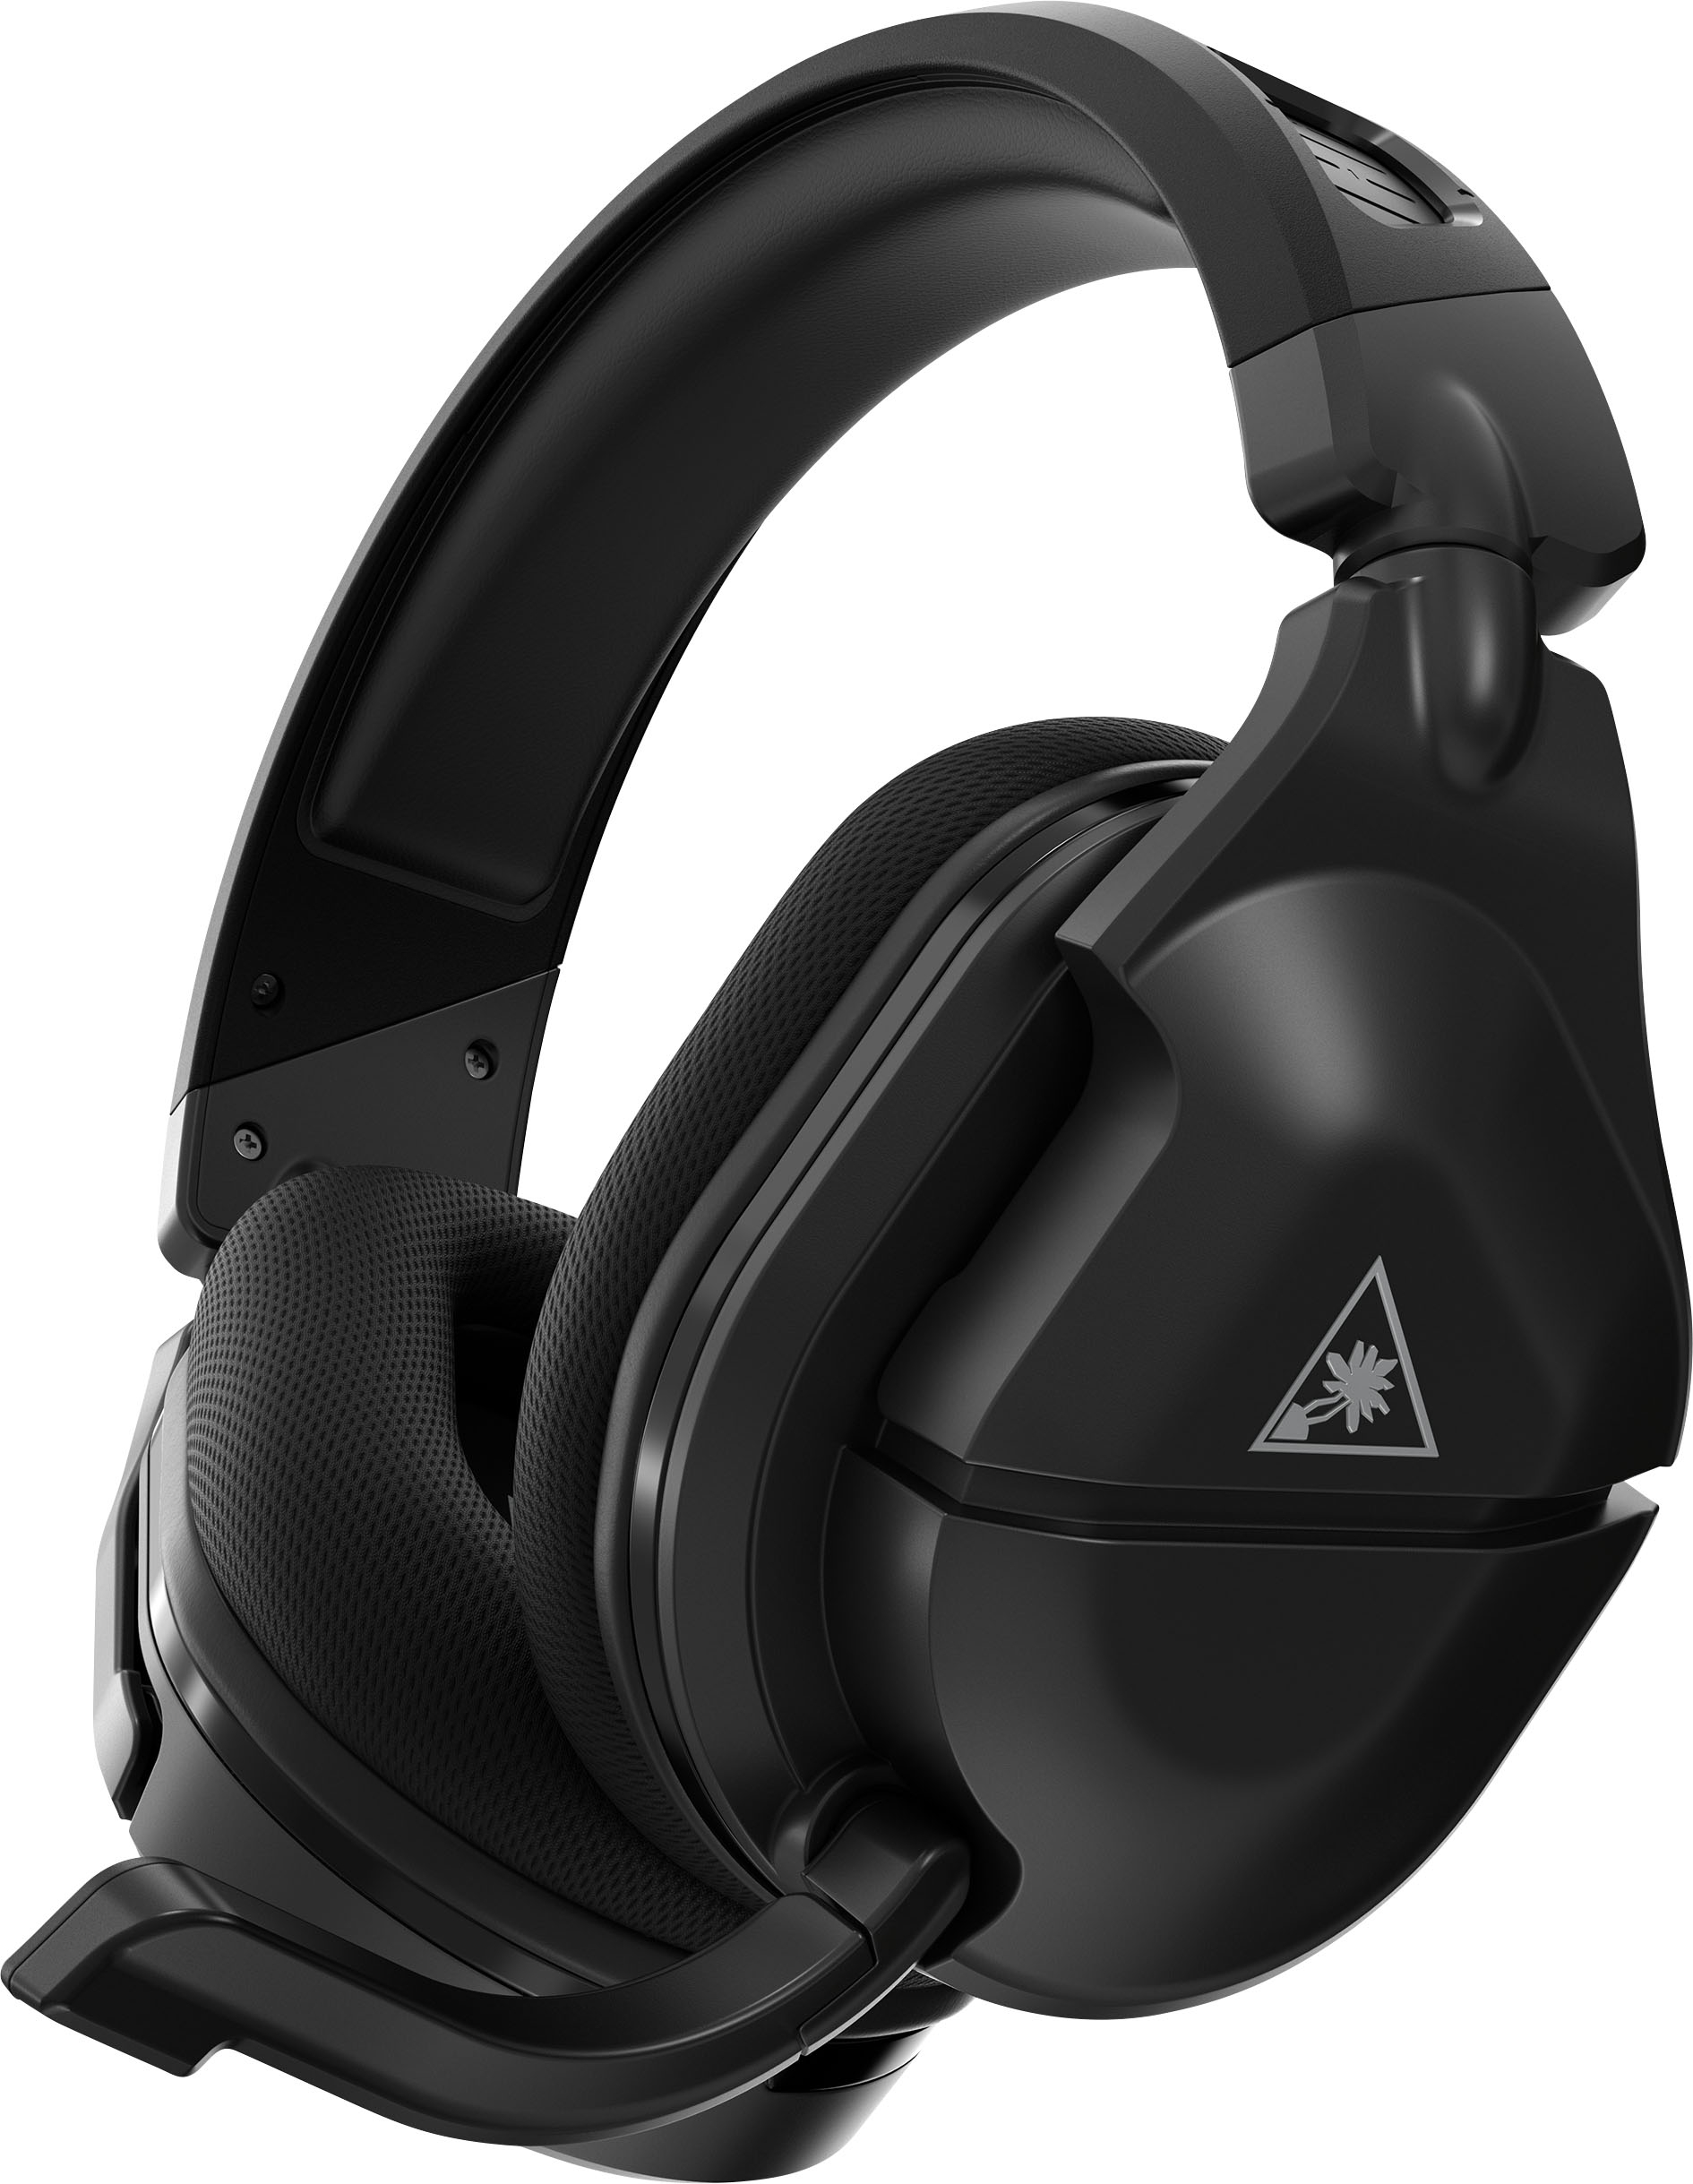 The Best Value Nintendo Switch Stereo Headset? Officially Licensed